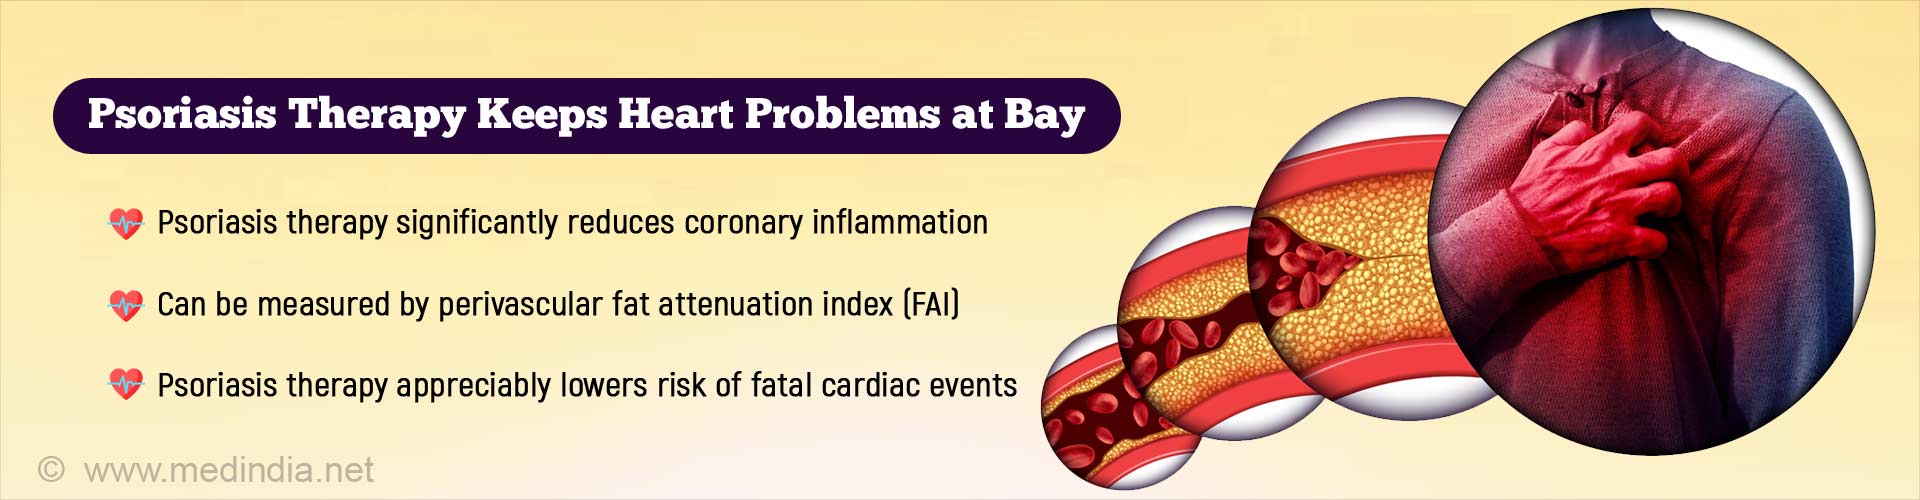 Psoriasis therapy keeps heart problems at bay. Psoriasis therapy significantly reduces coronary inflammation. Can be measured by perivascular fat attenuation index (FAI). Psoriasis therapy appreciably lowers risk of fatal cardiac events.